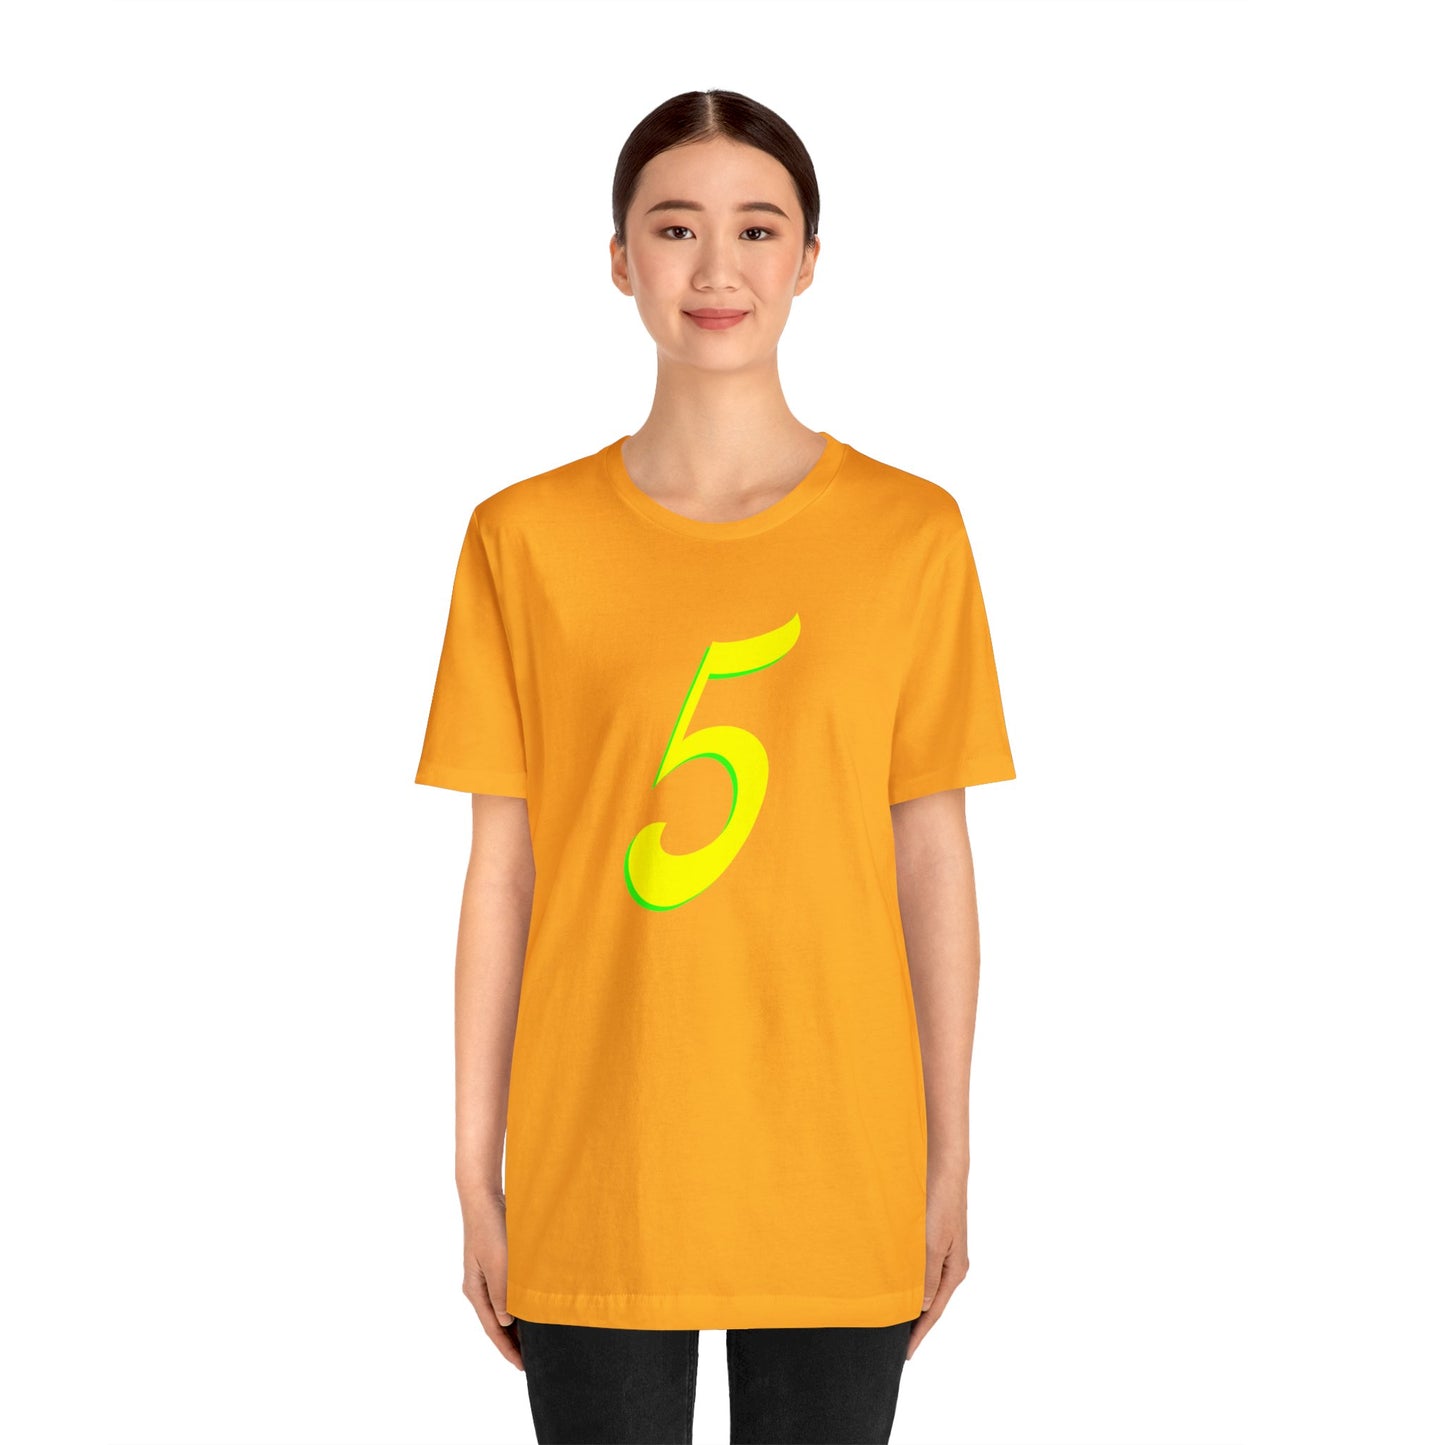 Number 5 Design - Soft Cotton Tee for birthdays and celebrations, Gift for friends and family, Multiple Options by clothezy.com in Asphalt Size Medium - Buy Now